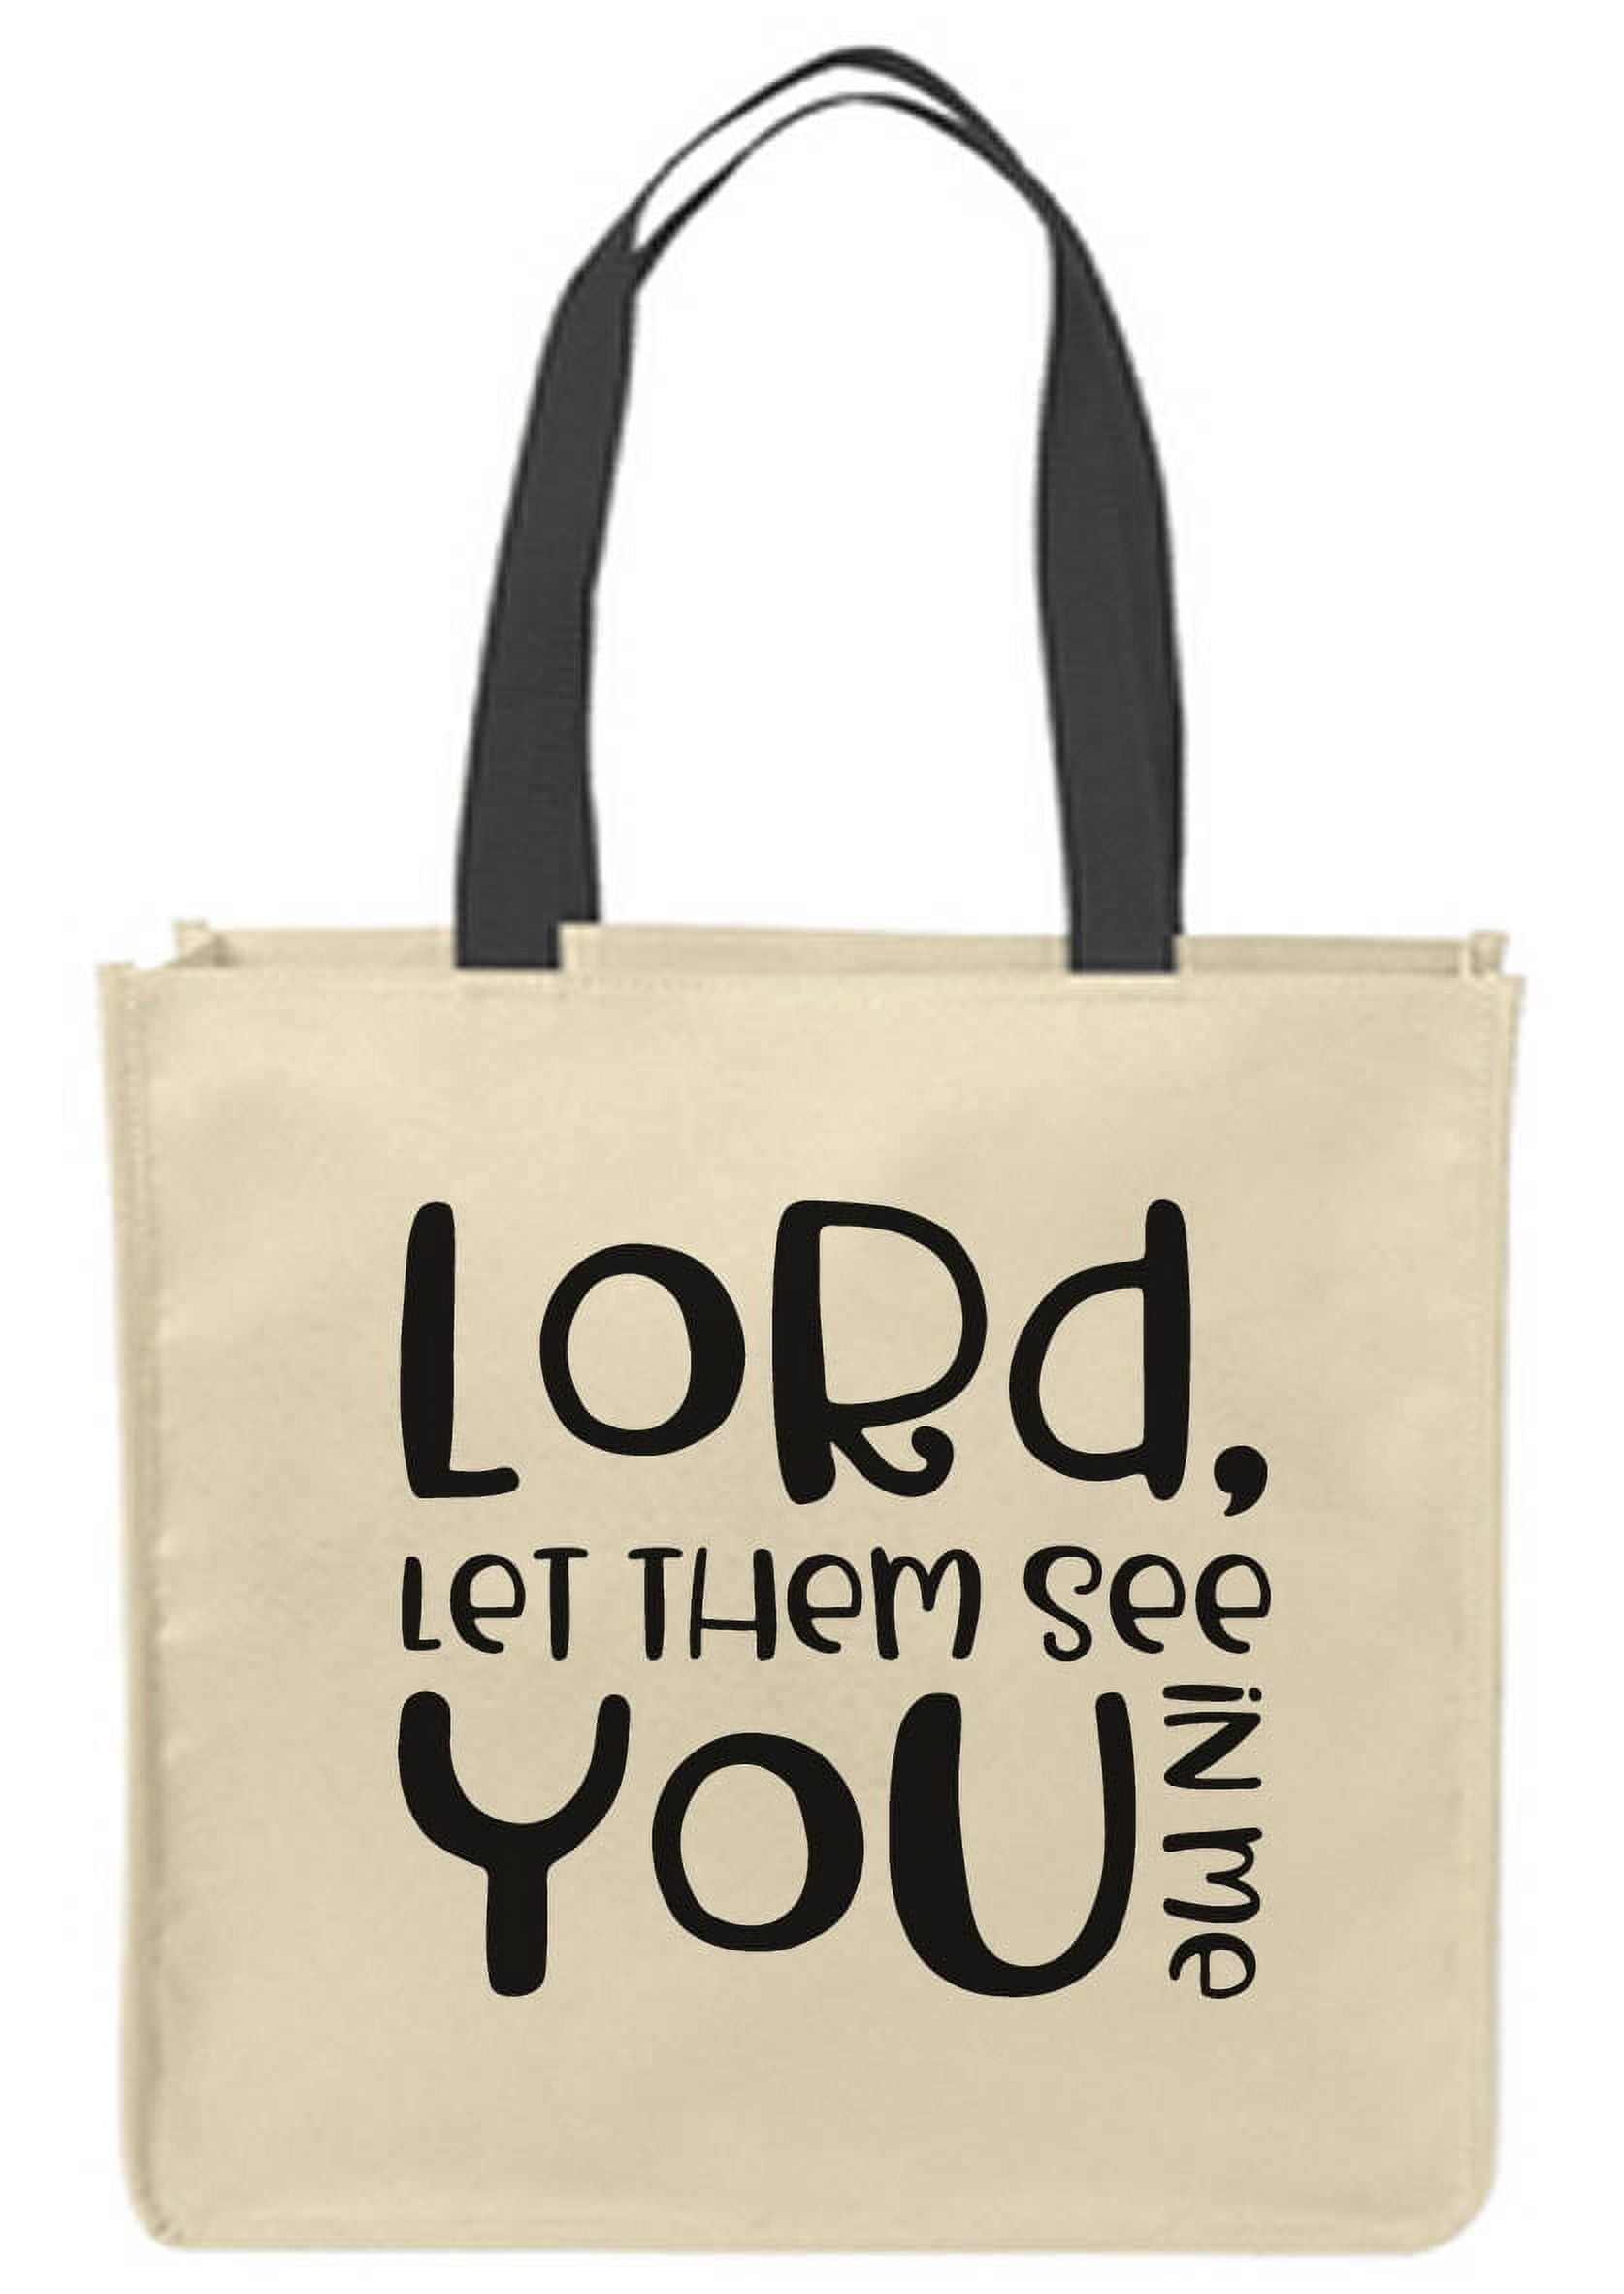 FUNKY TOTE BAGS - SELECTION OF DESIGNS - Photees